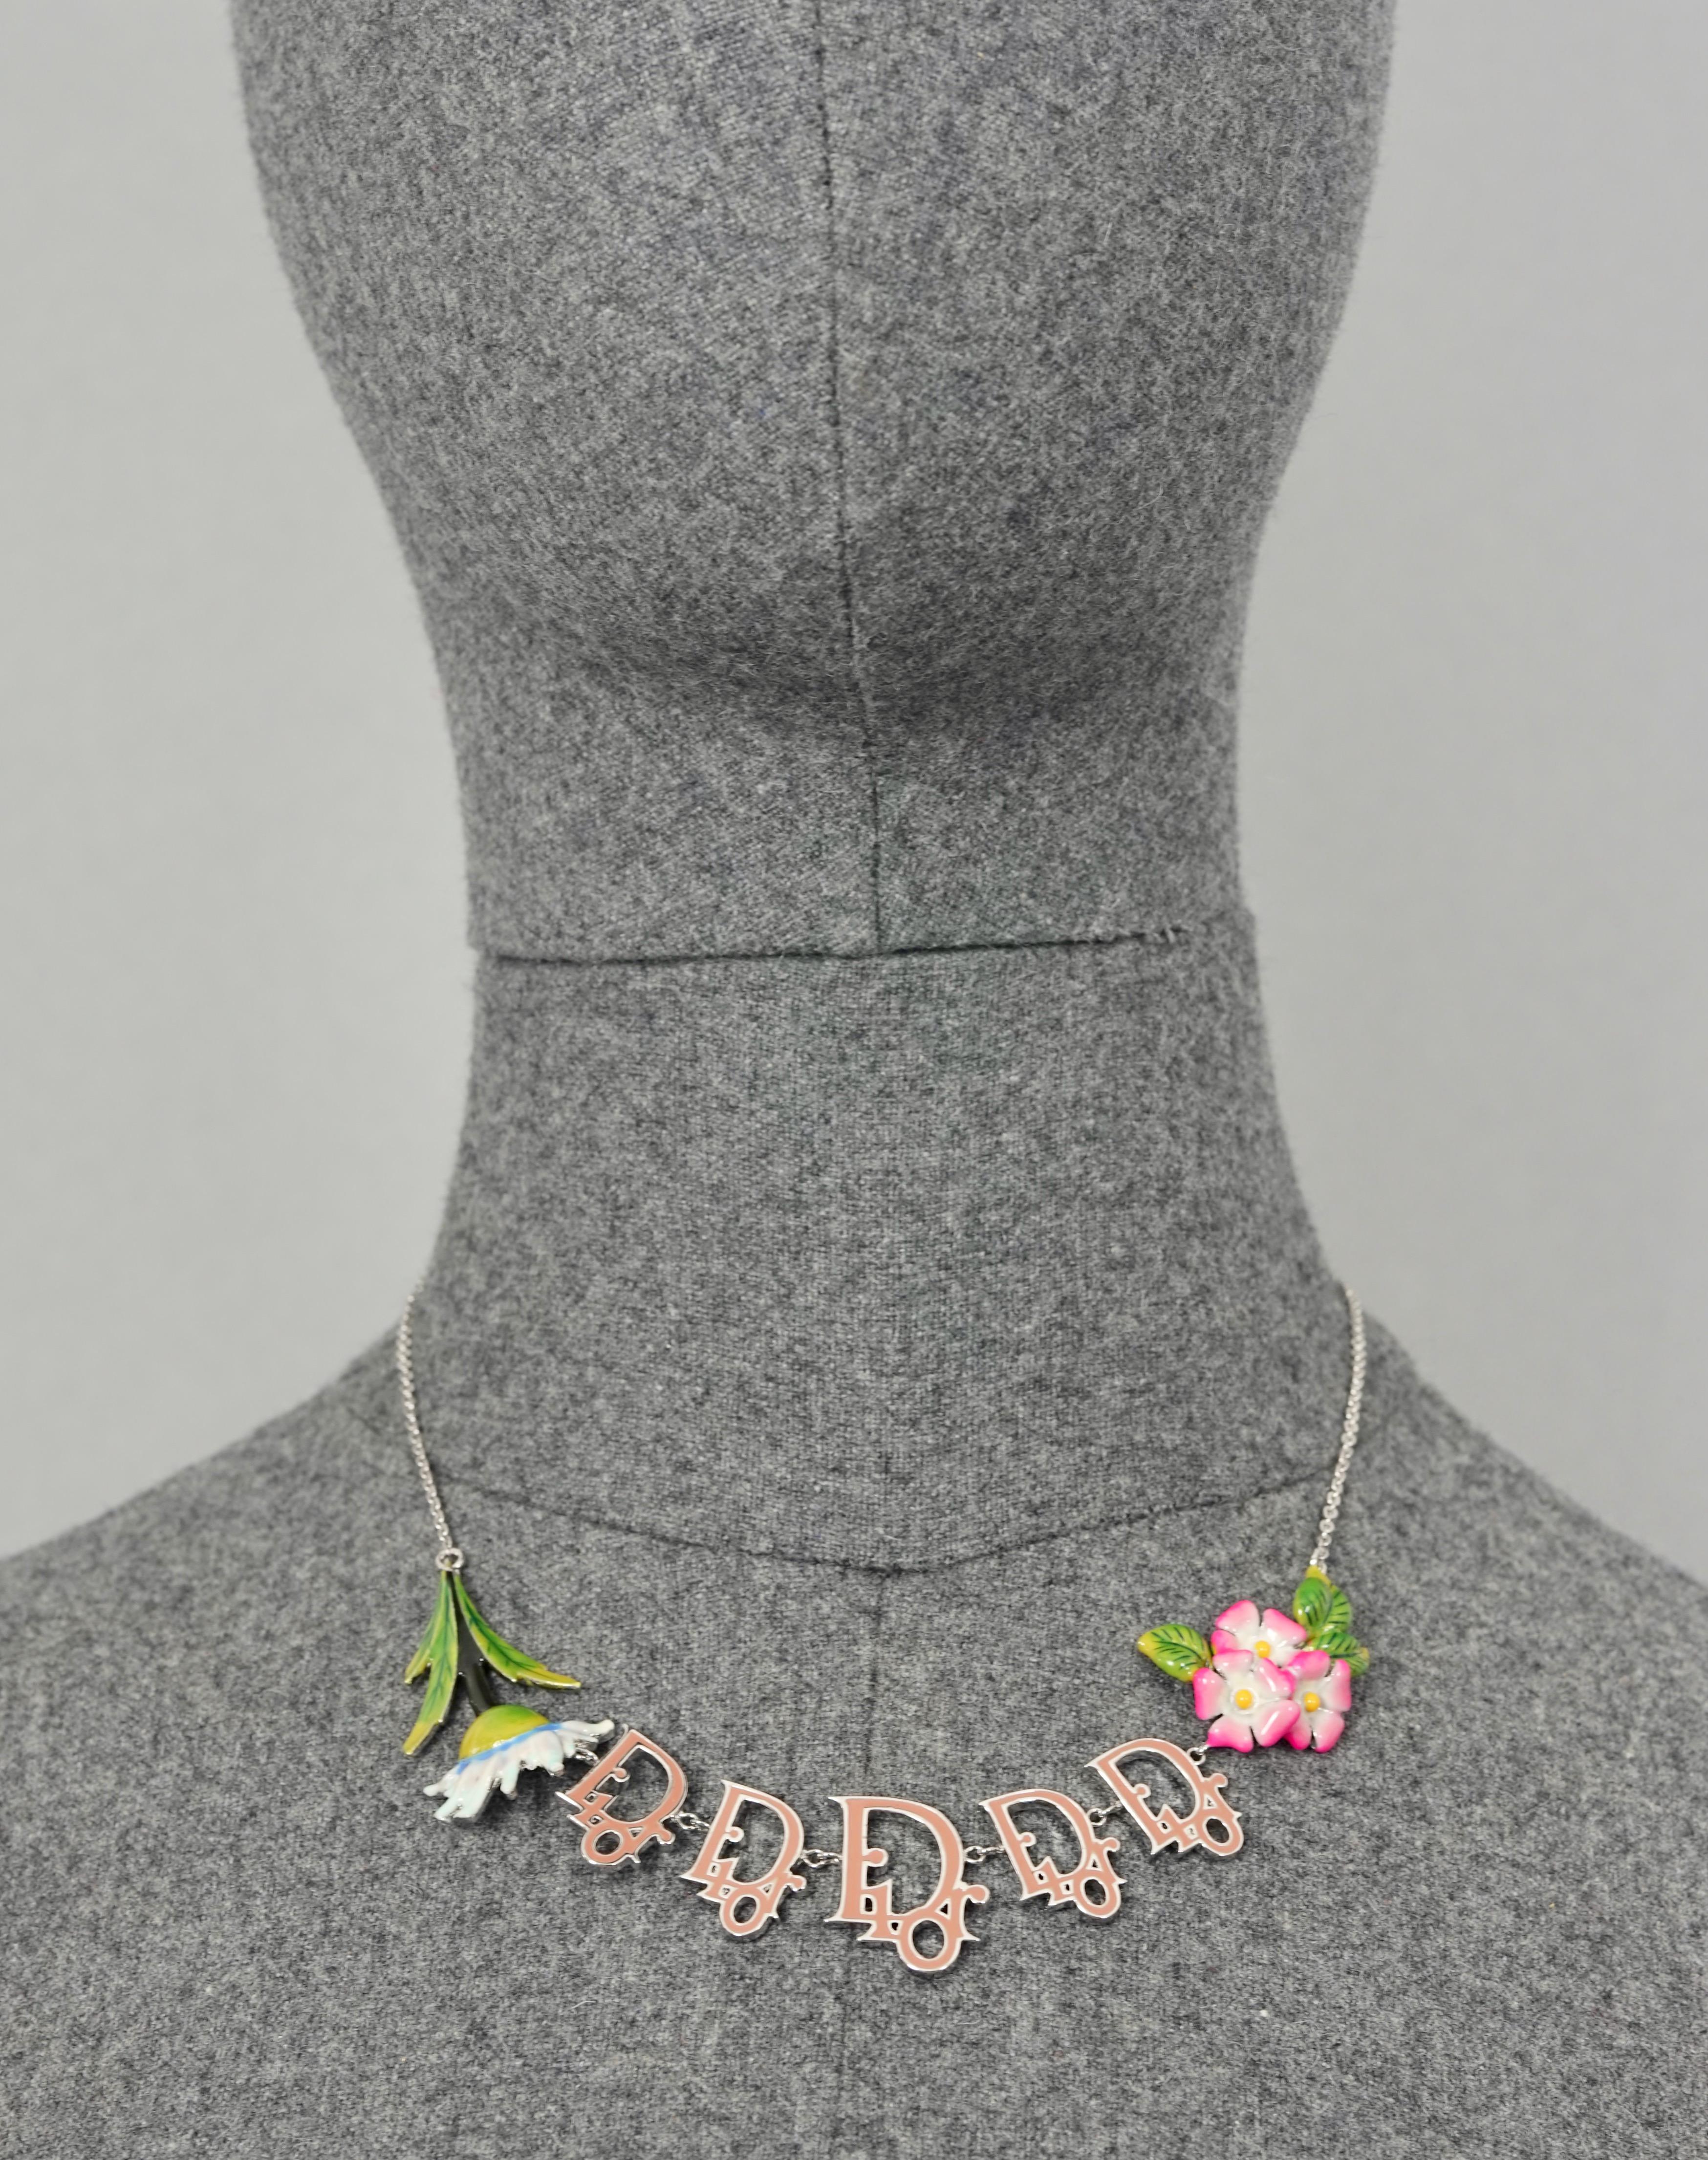 Vintage CHRISTIAN DIOR by GALLIANO Monogram Charm Flower Enamel Necklace

Measurements:
Height: 1 inch (2.5 cm)
Wearable Length: 14.37 inches to 16.73 inches (36.5 cm to 42.5 cm)

Features:
- 100% Authentic CHRISTIAN DIOR by GALLIANO.
- Enamel DIOR